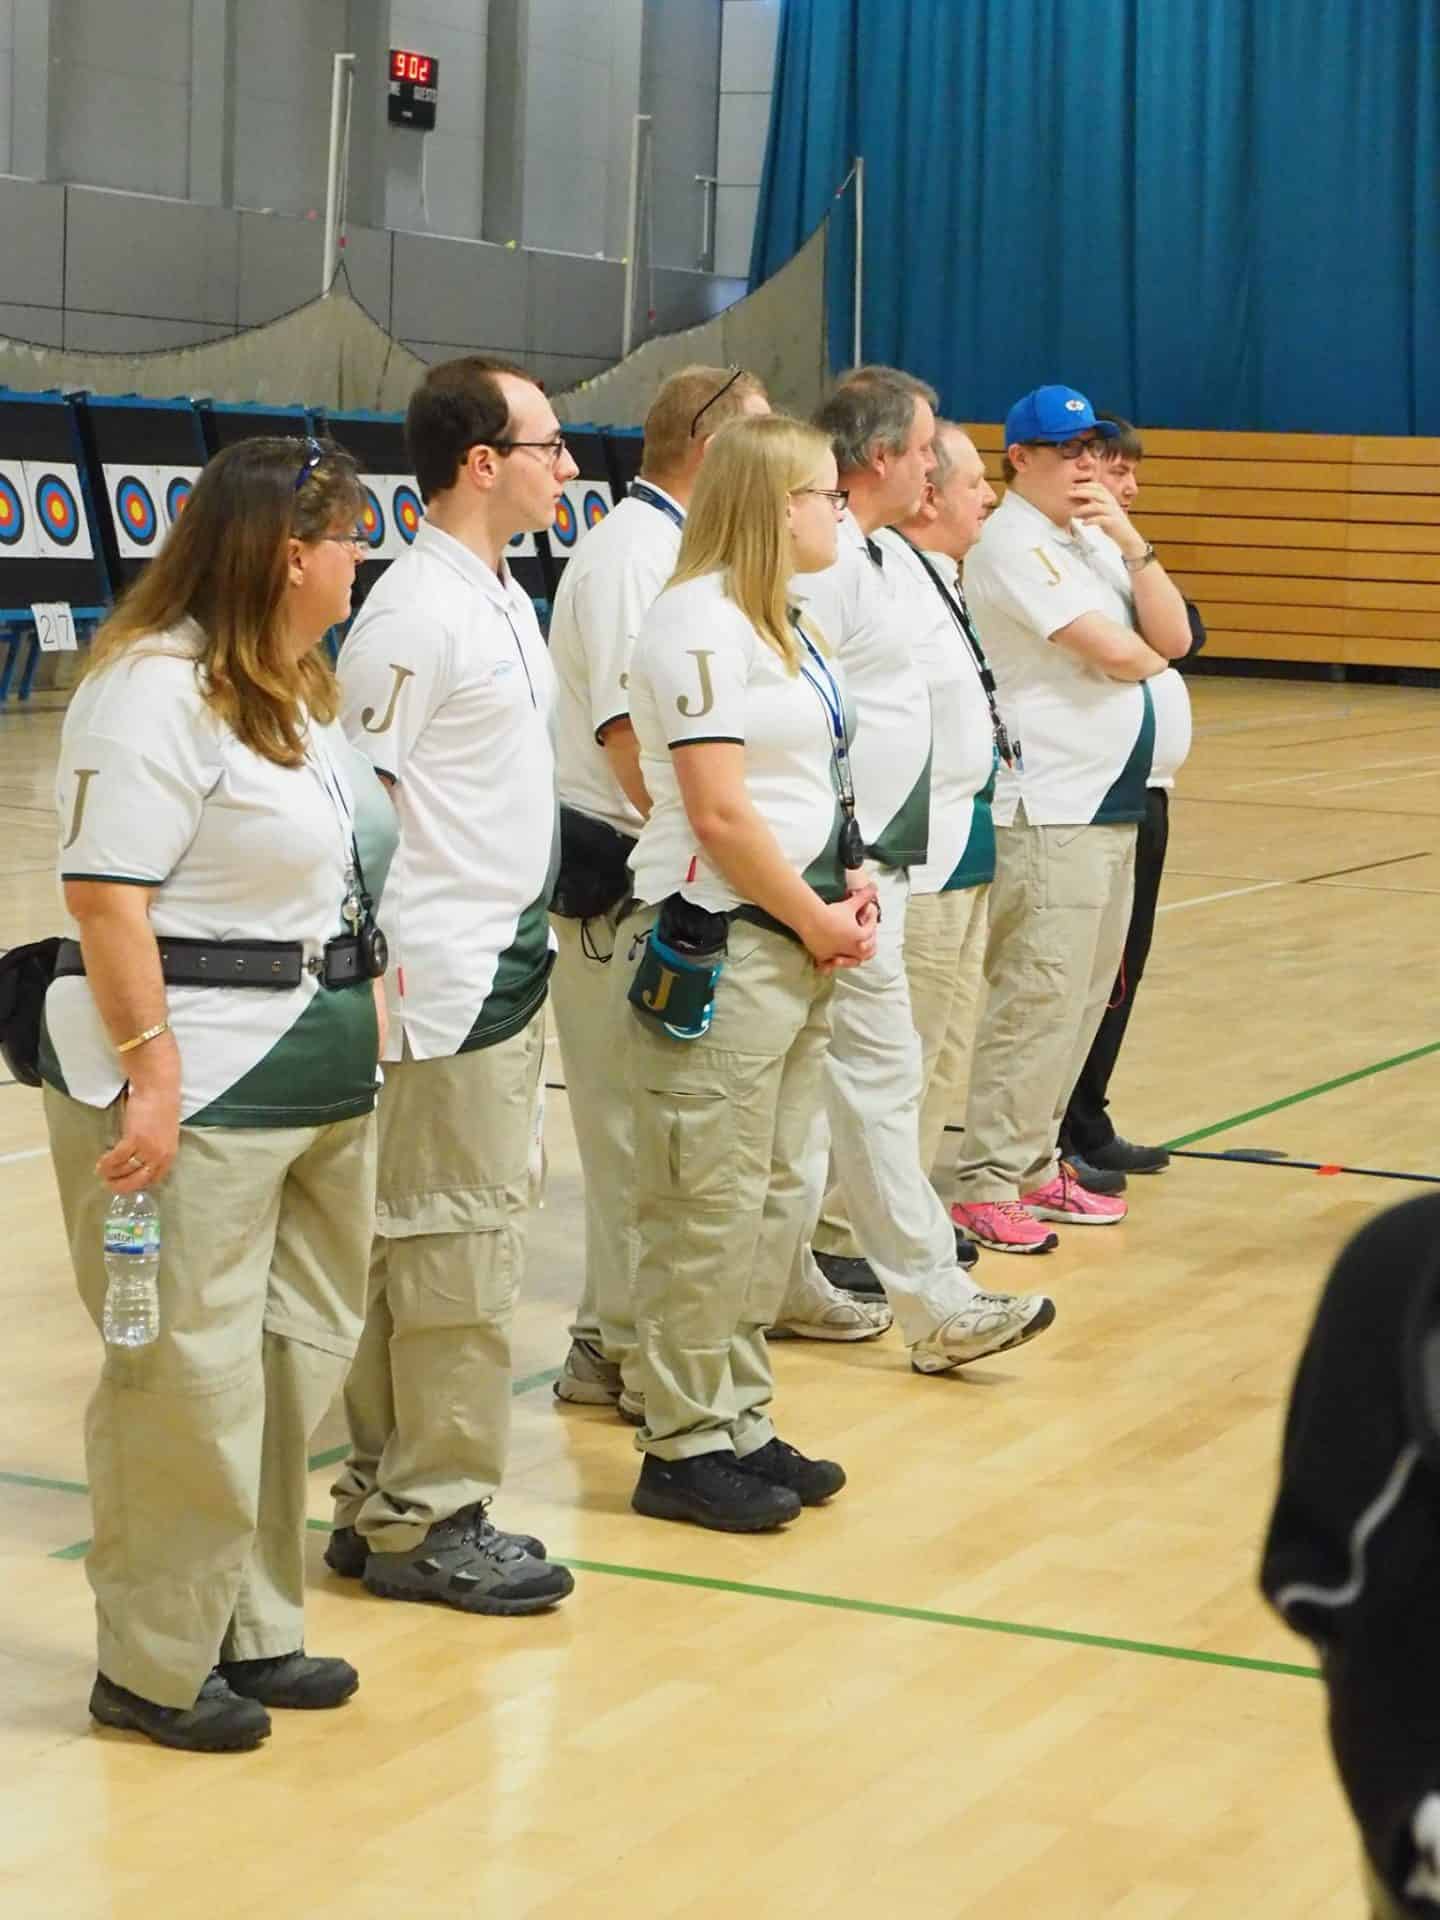 My volunteer role as an archery judge